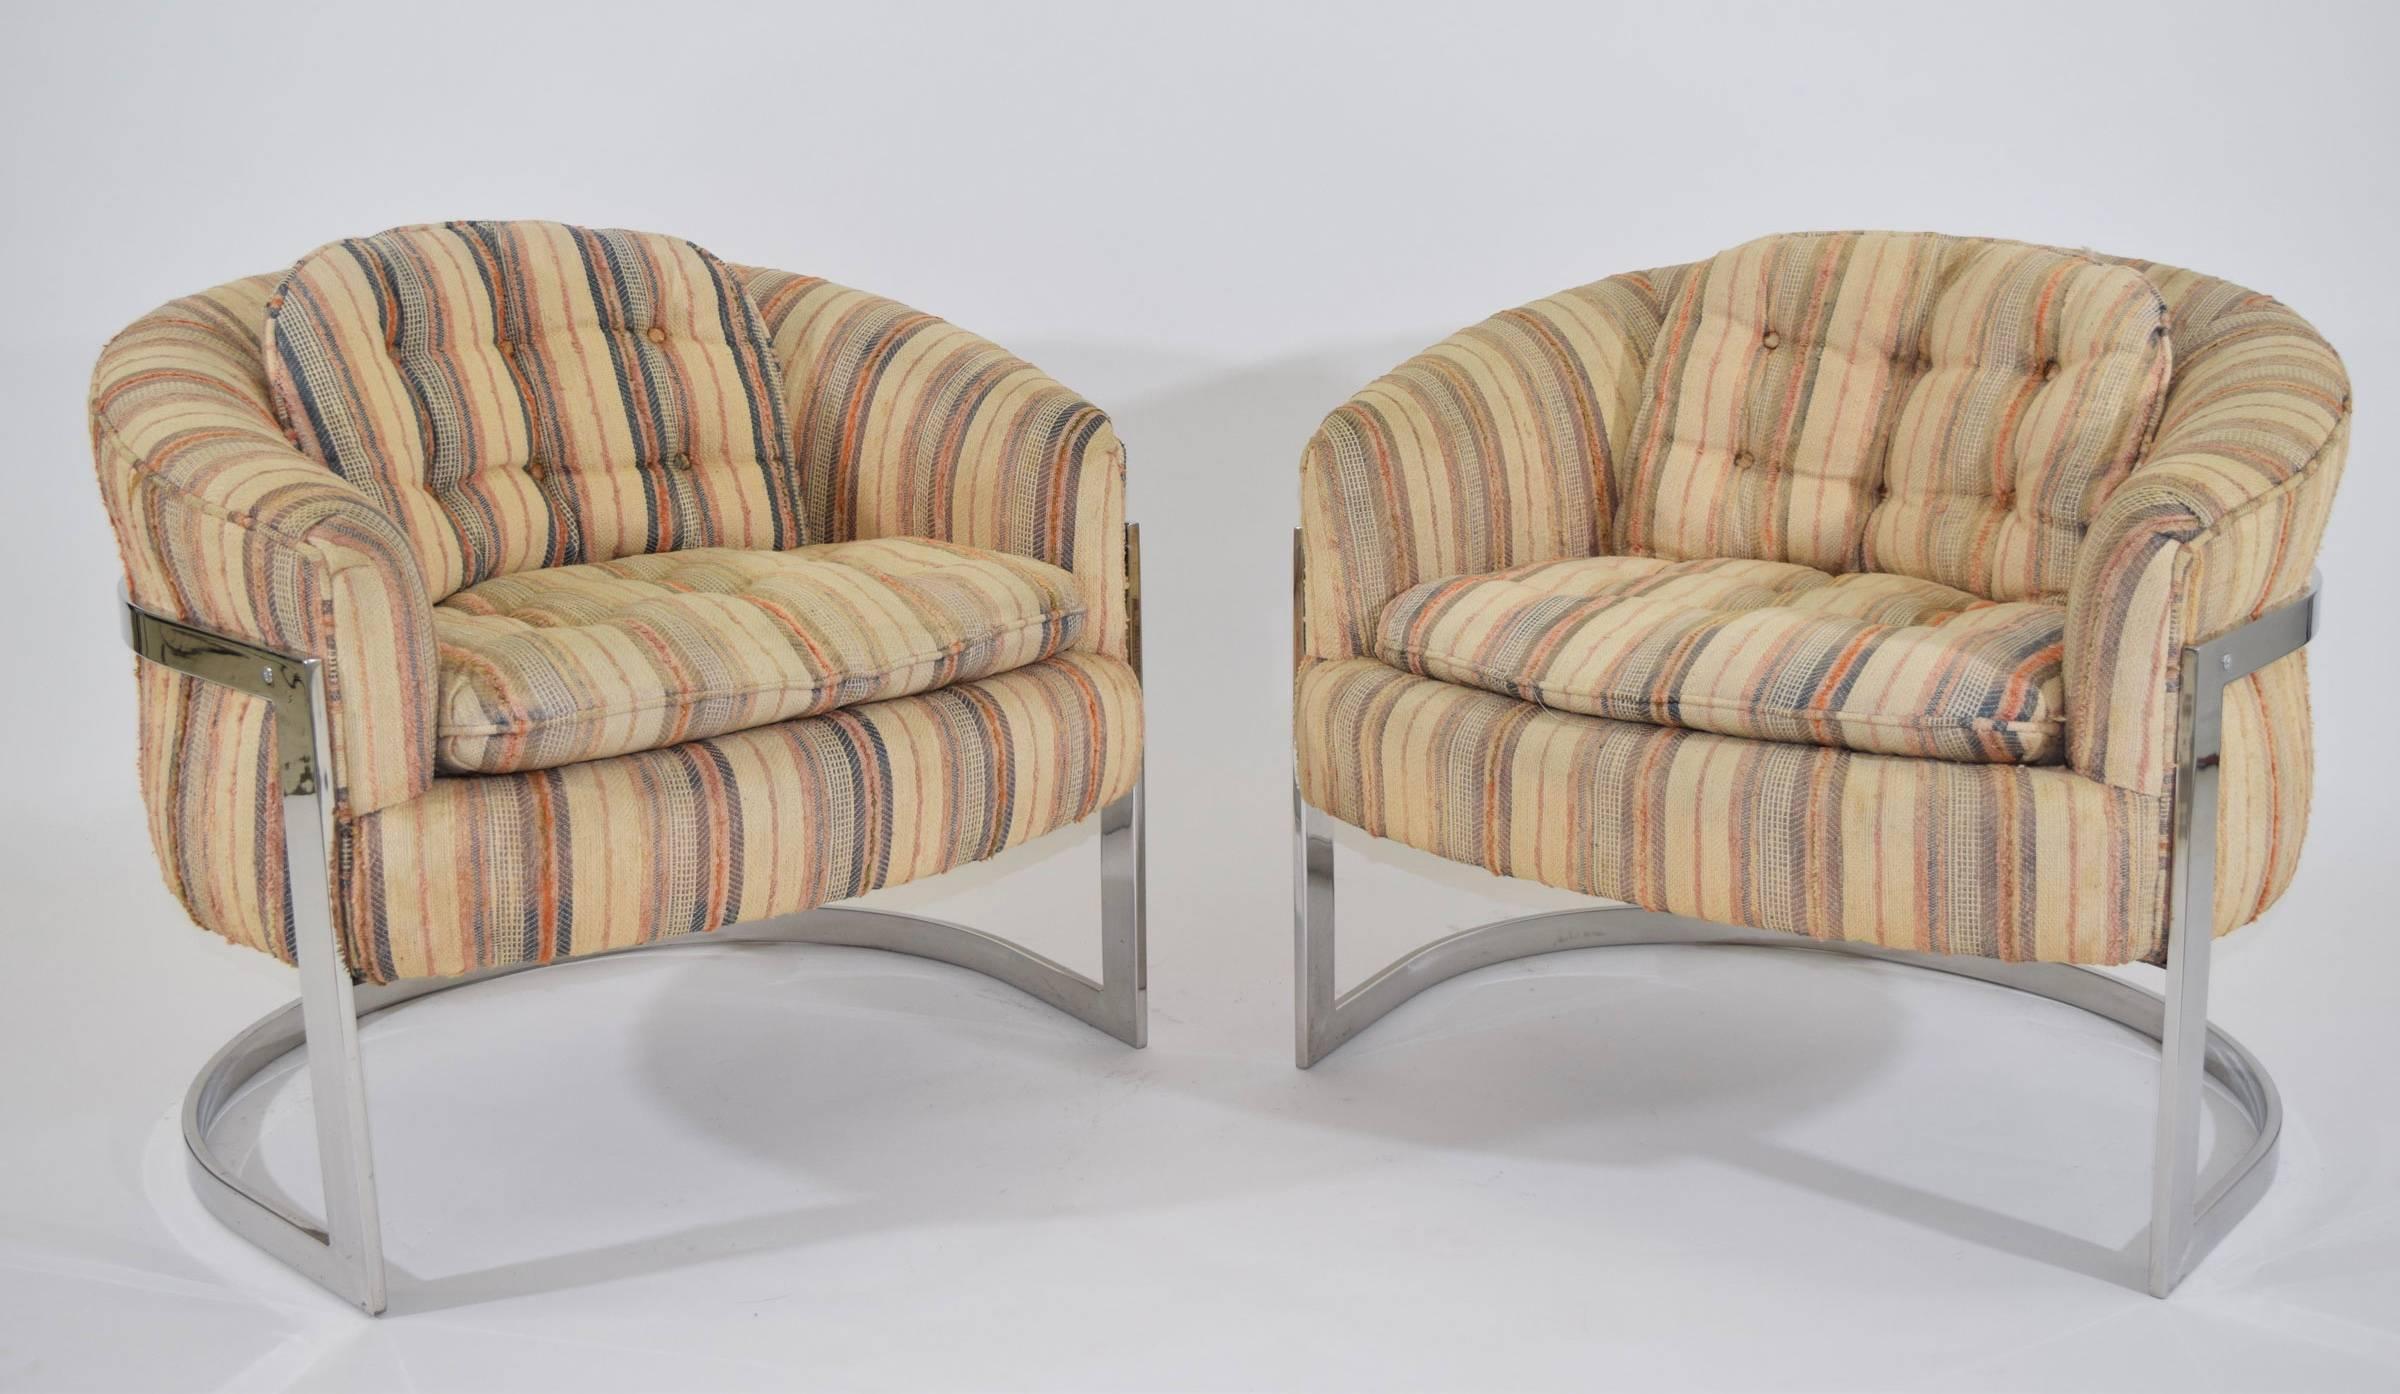 A really nice pair of Milo Baughman lounge chairs with a curved back and cantilevered chrome frame. We can help with reupholstery in fabric of buyers choice.